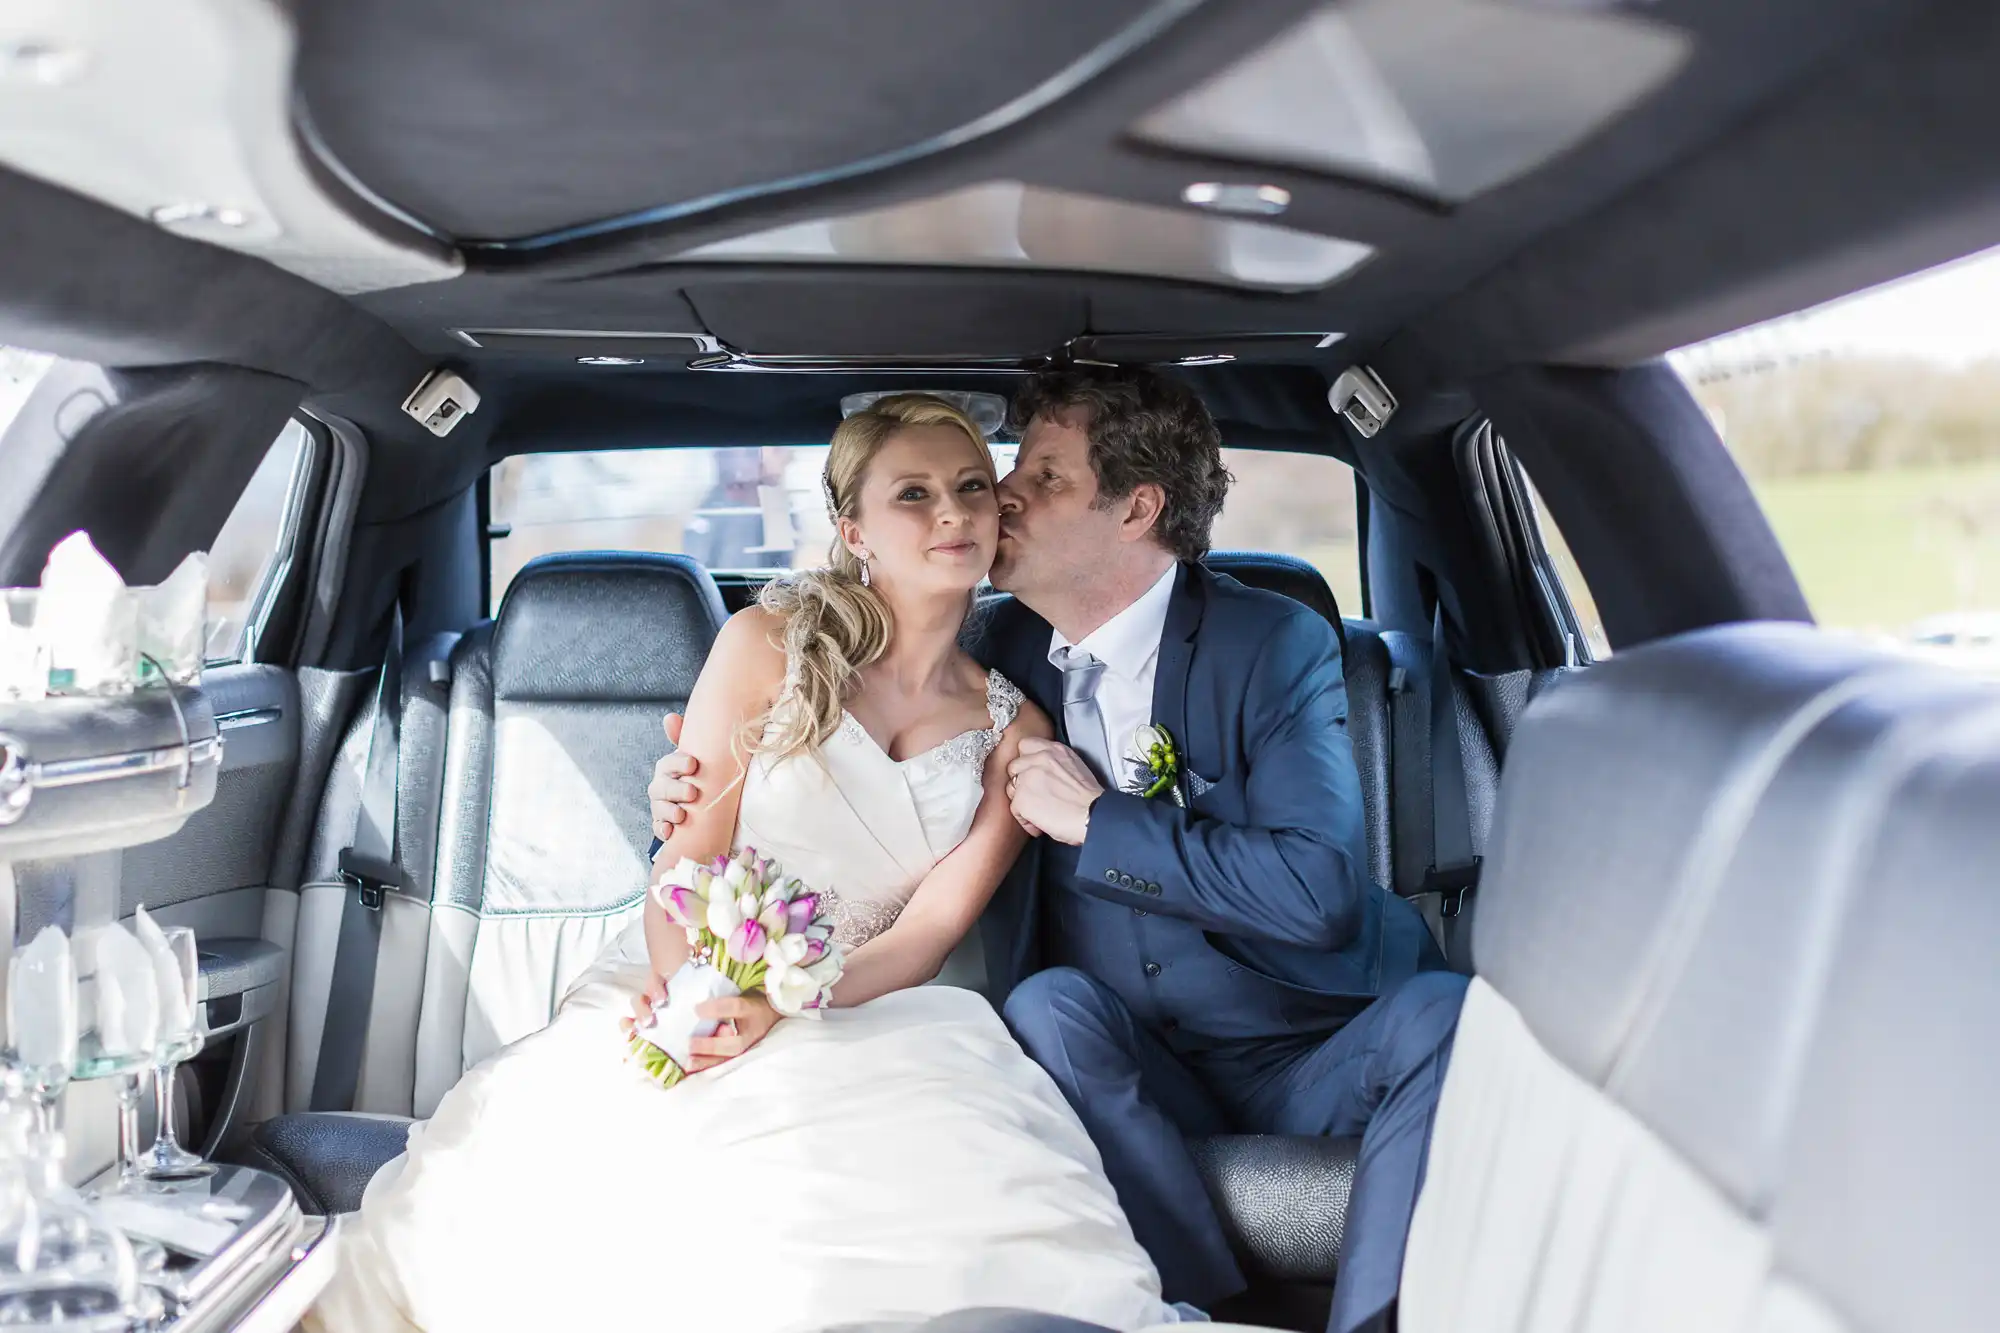 A groom in a blue suit kisses a bride in a white dress inside a spacious car, both holding bouquets.